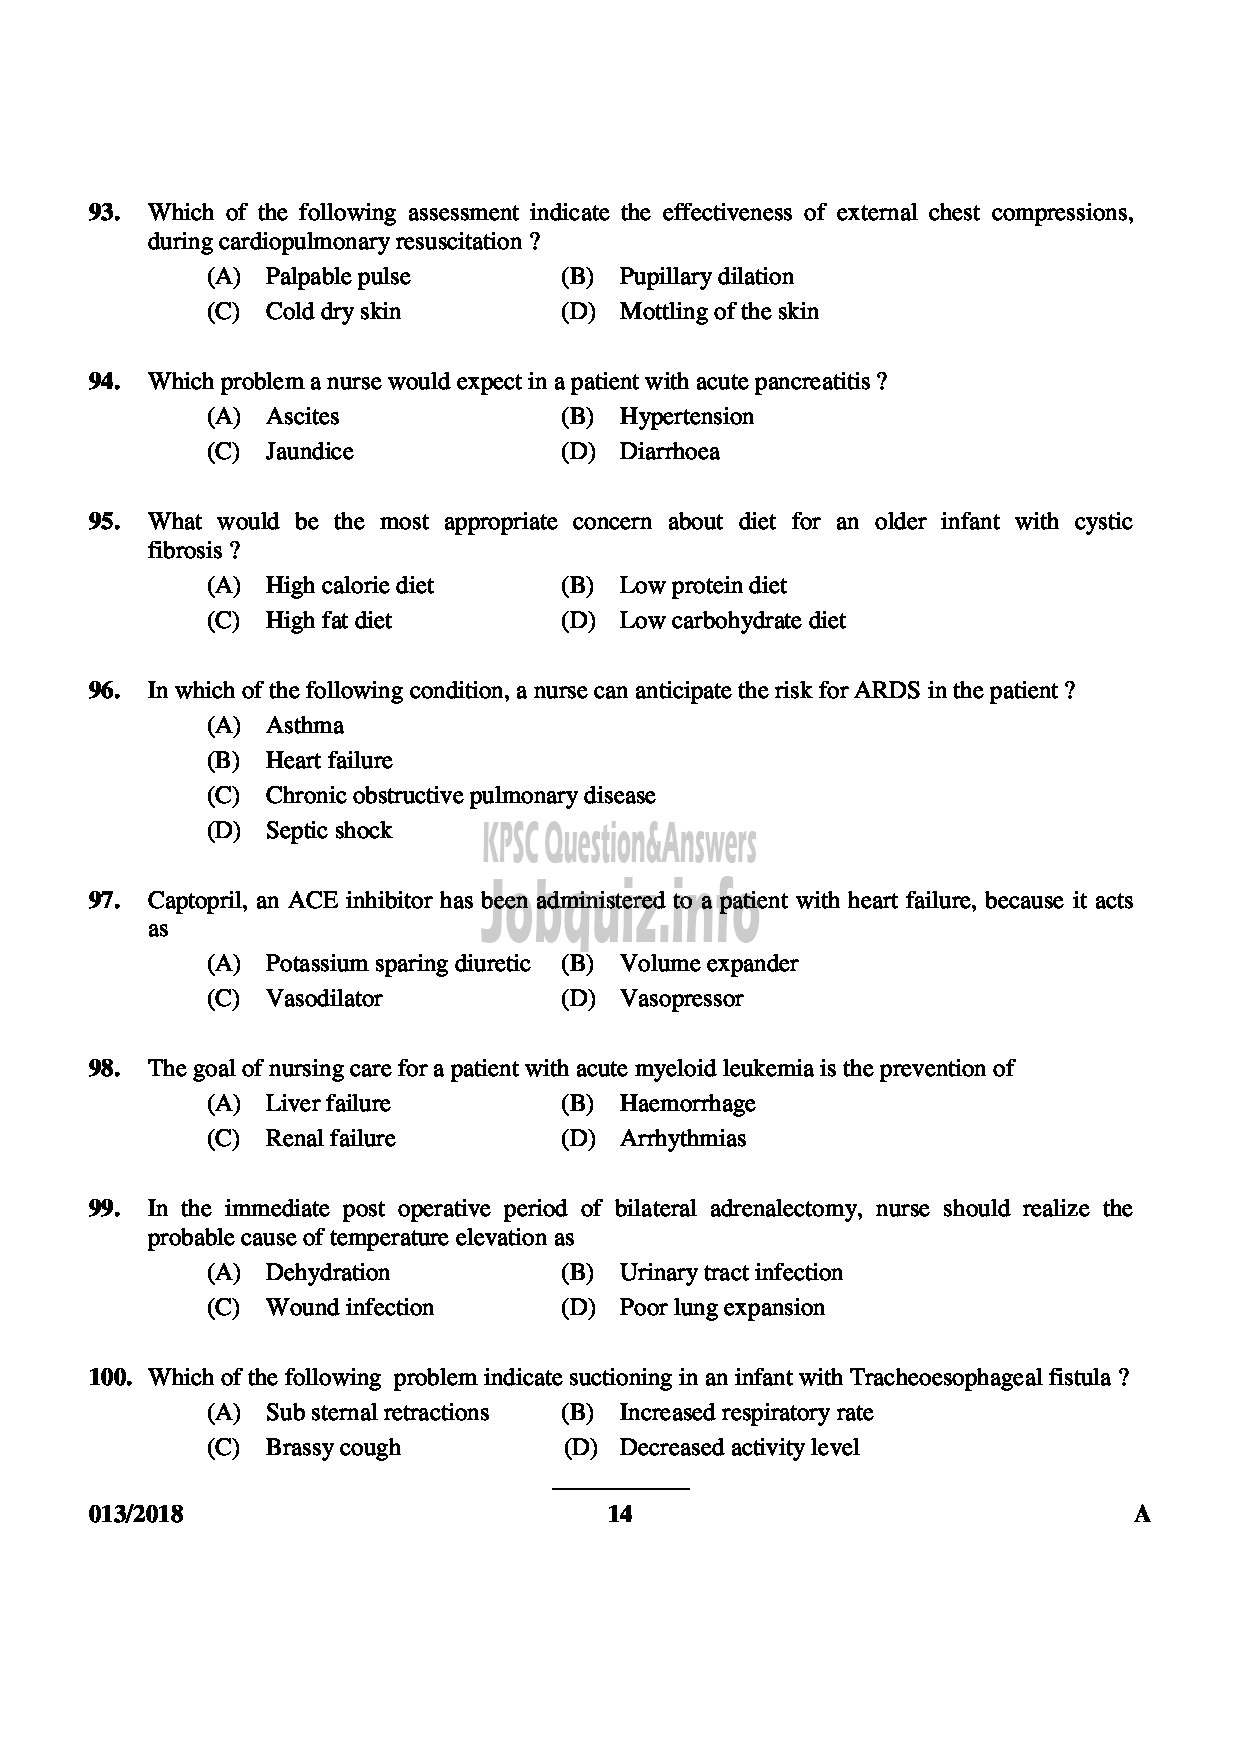 Kerala PSC Question Paper - VOCATIONAL INSTRUCTOR IN DOMESTIC NURSING VHSE-14